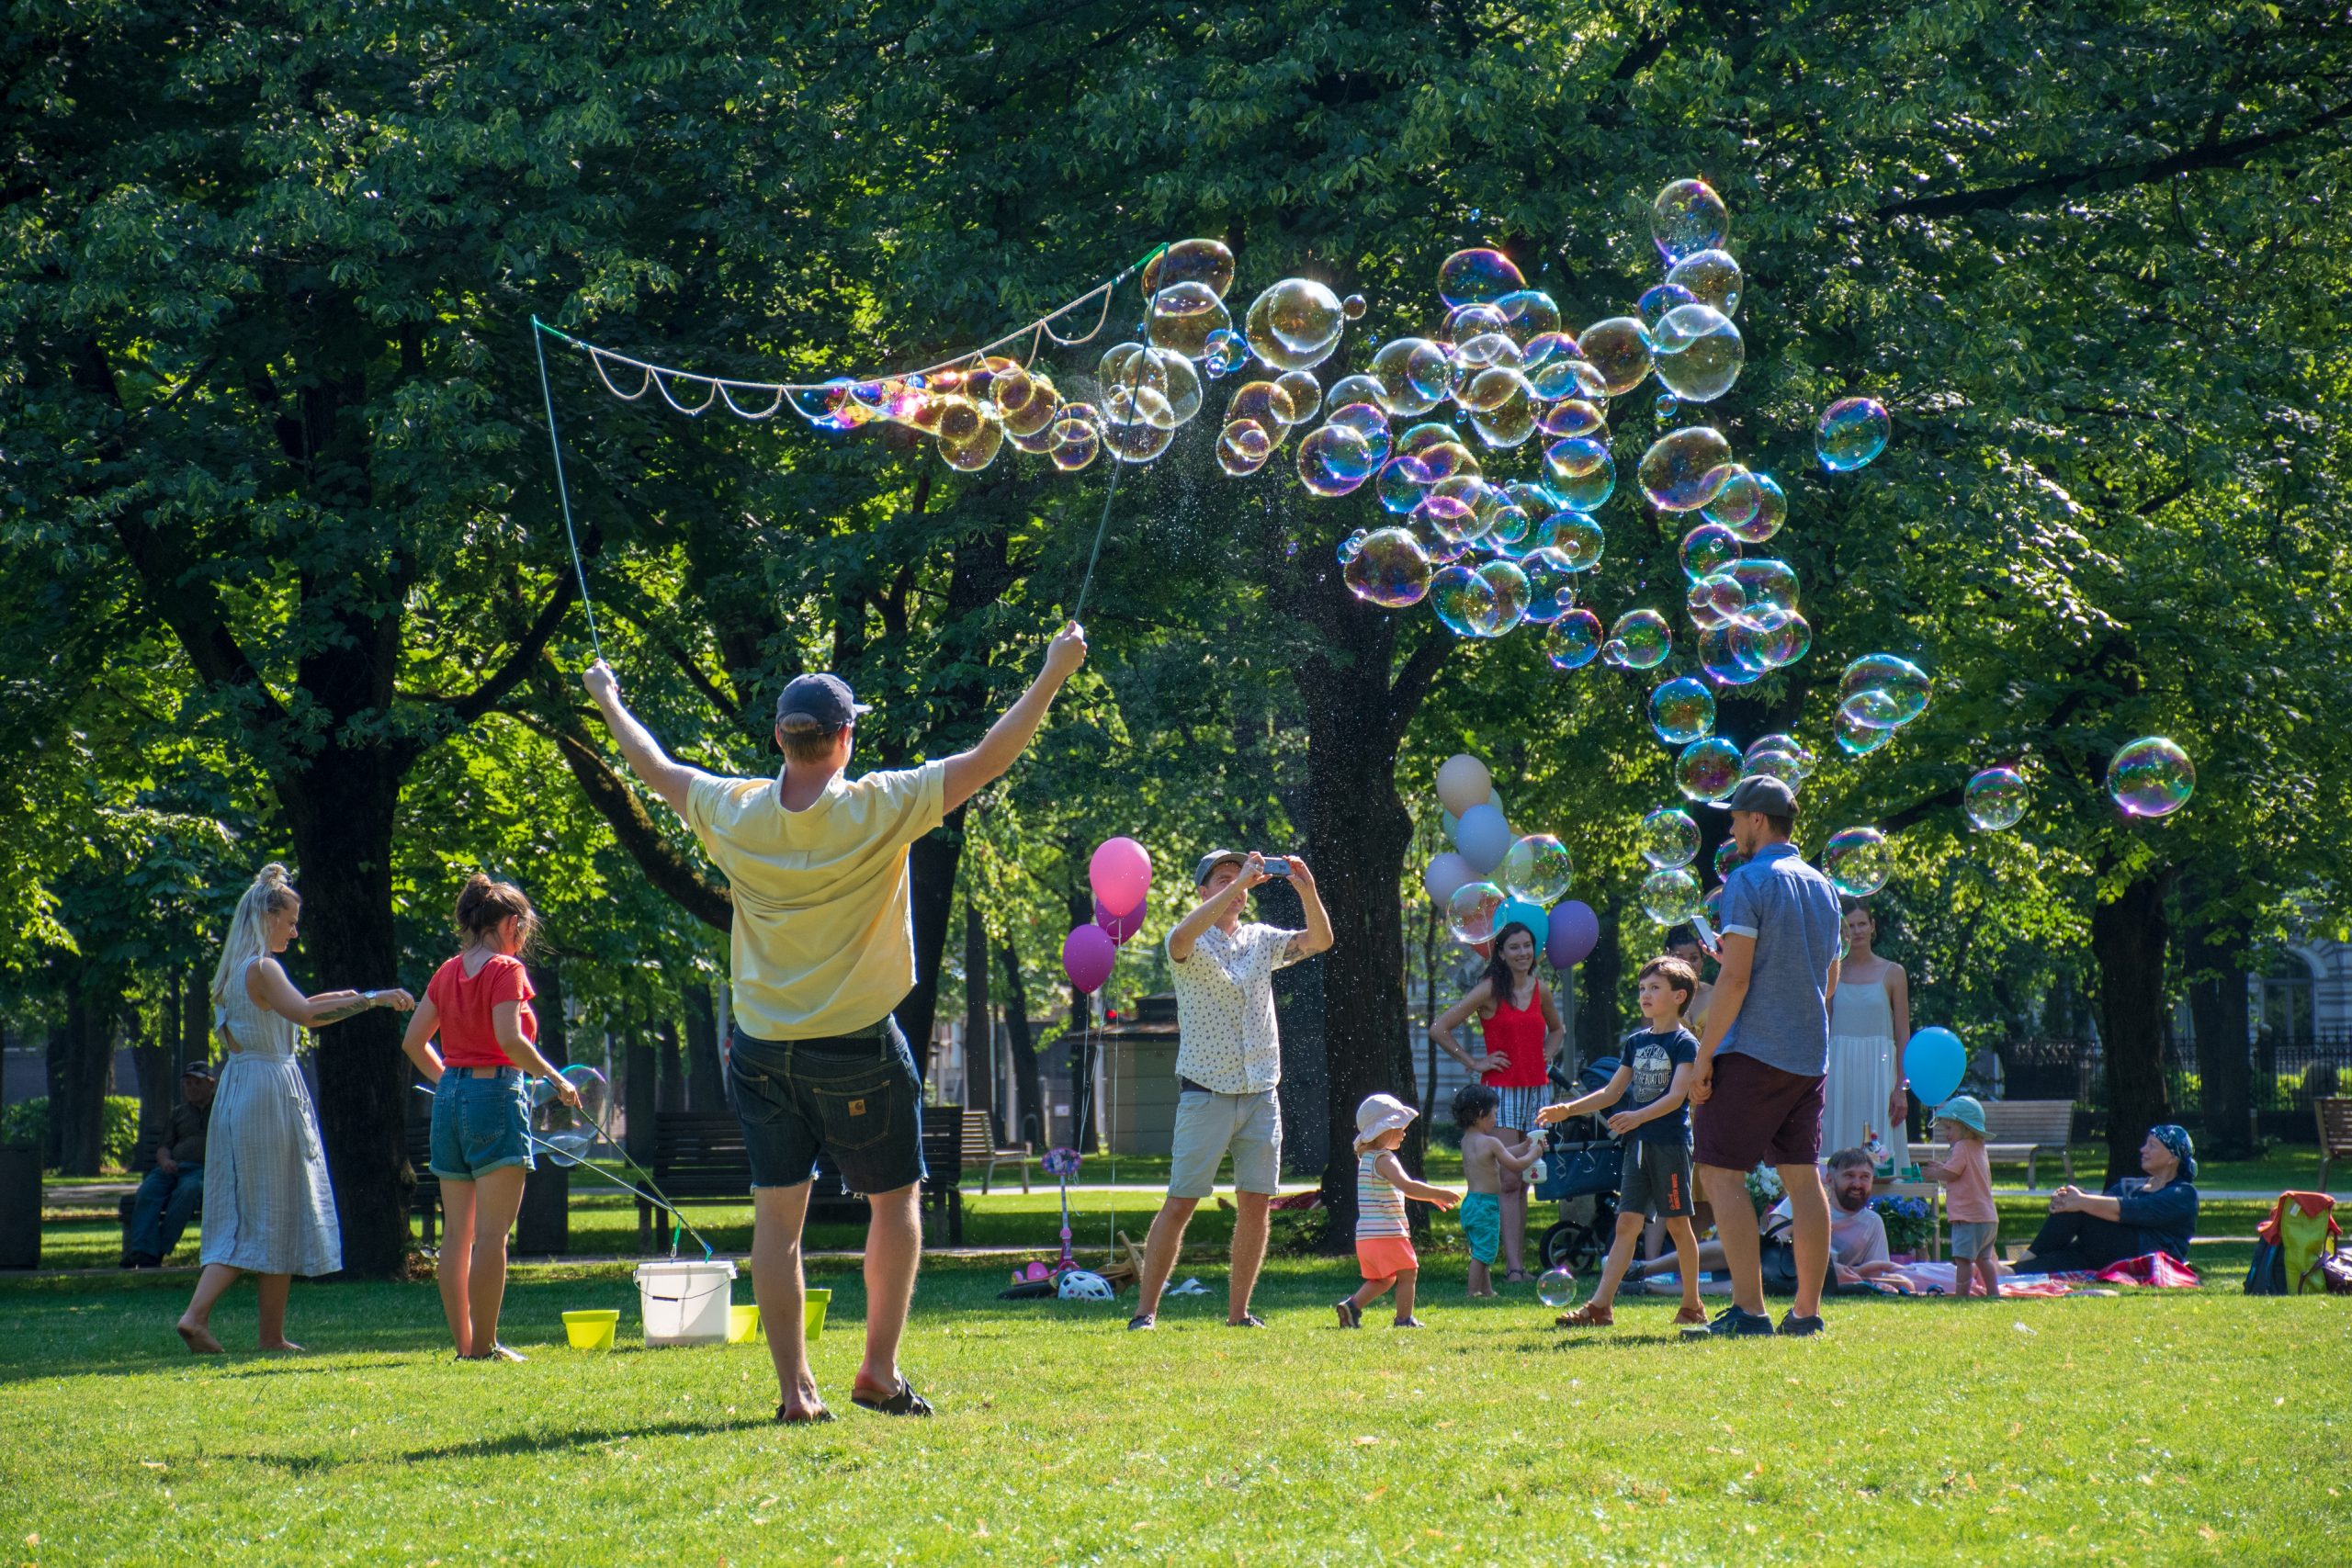 Riga / Latvia - Juy 27 2019: Children play outdoors in a park with their parents on a sunny day, with soap bubbles